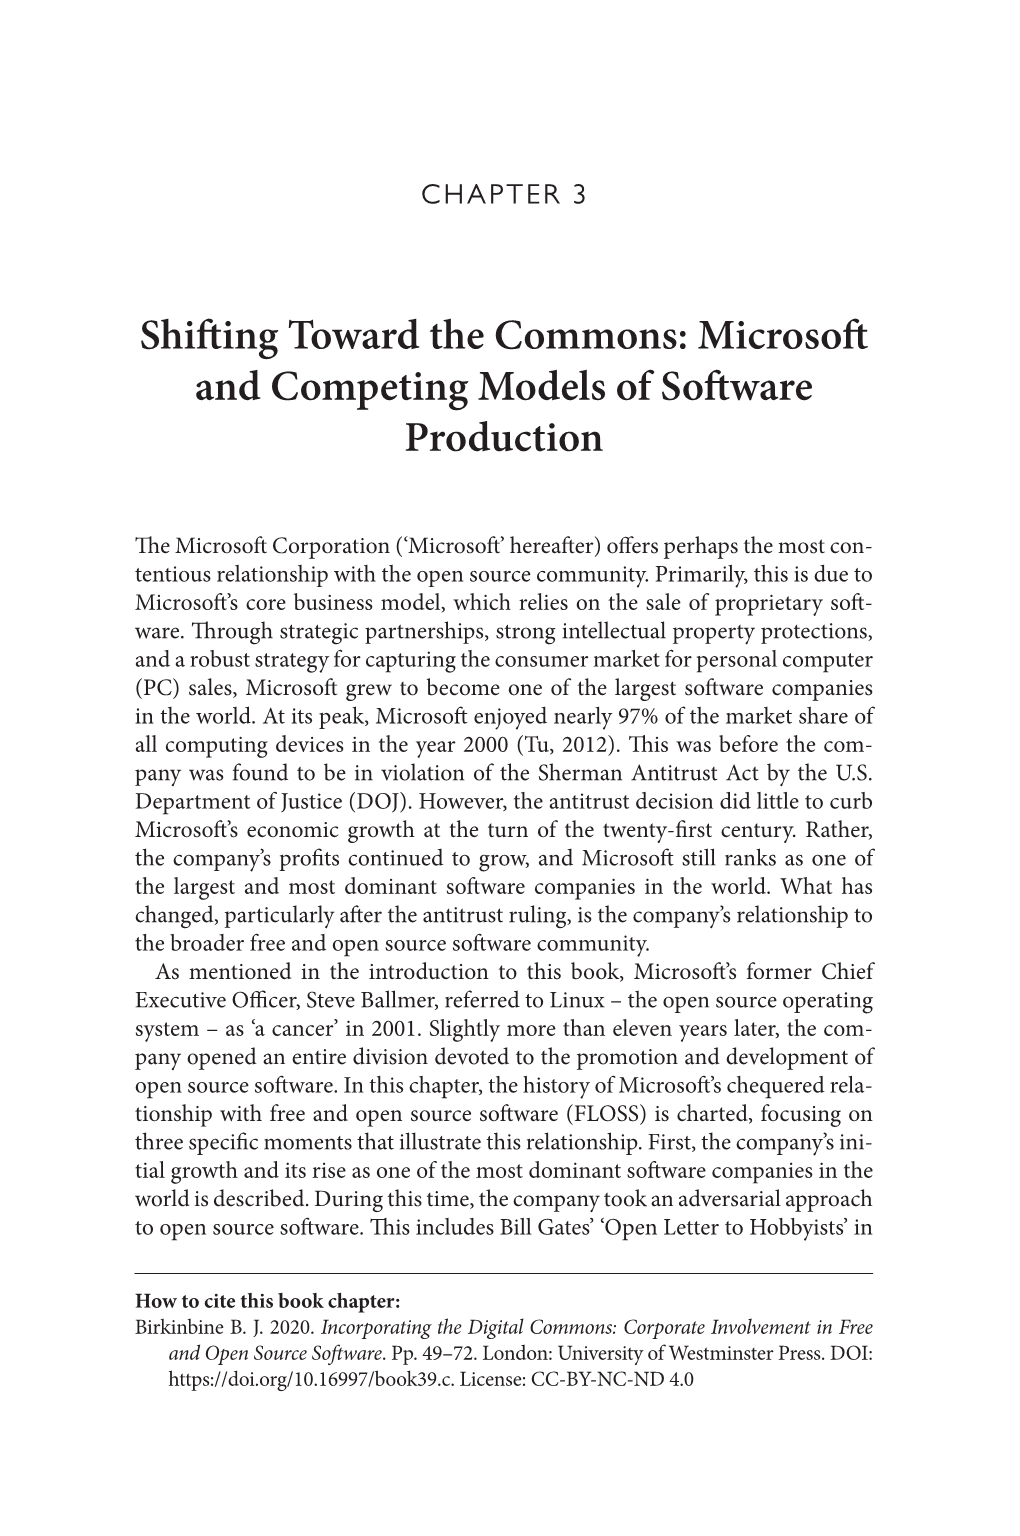 Shifting Toward the Commons : Microsoft and Competing Models Of